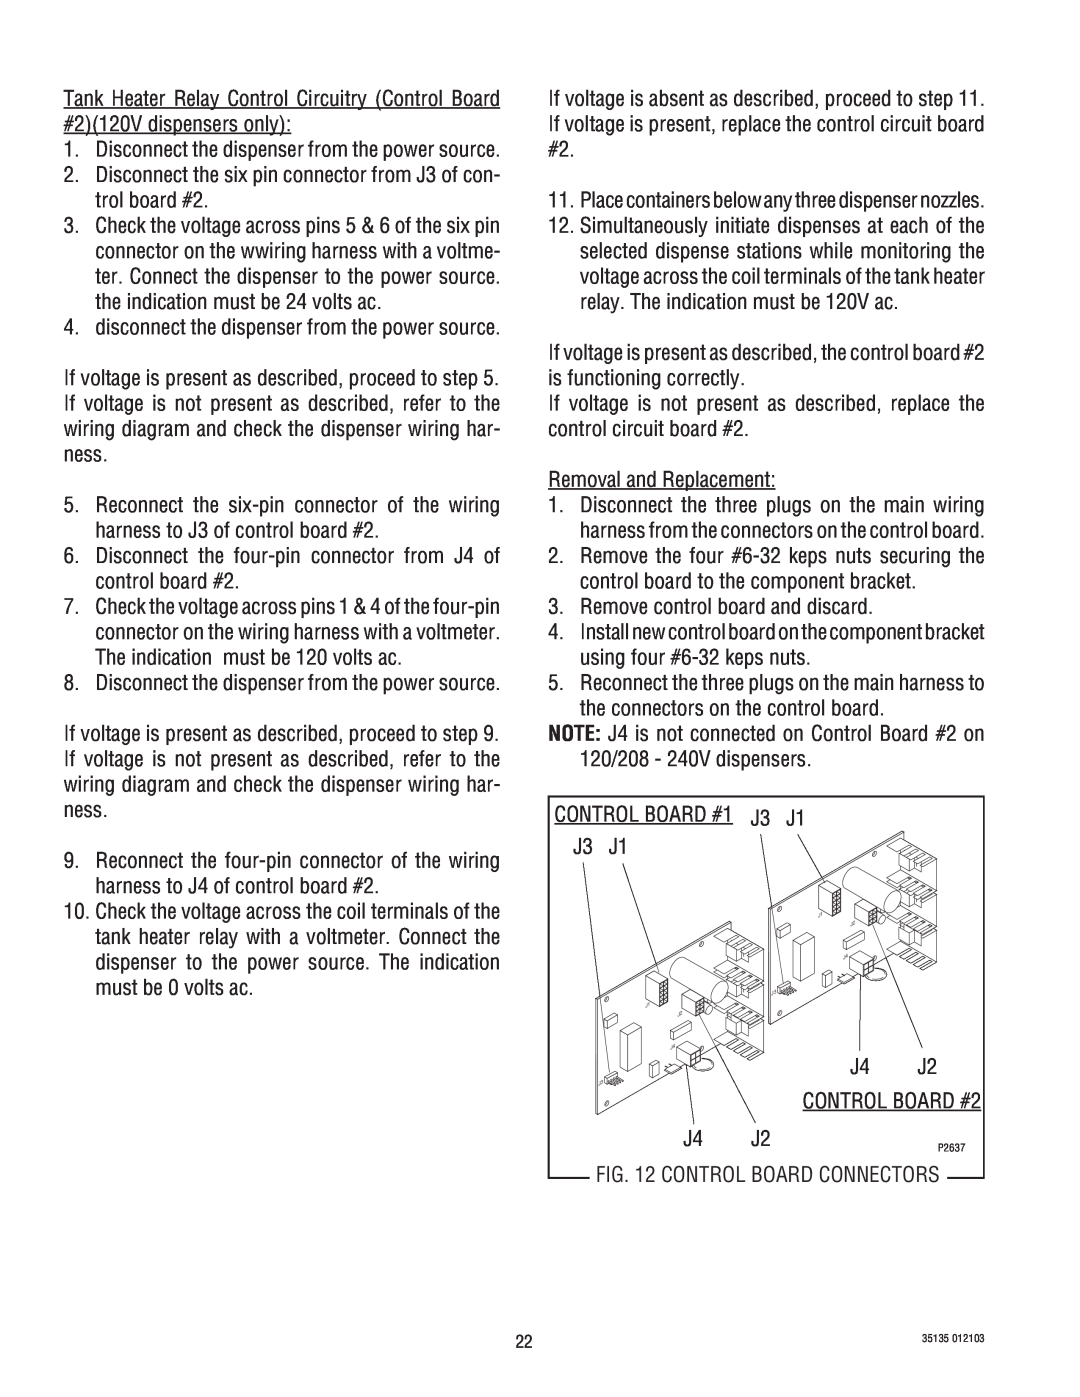 Bunn FMD-5, FMD-4 service manual Disconnect the dispenser from the power source 